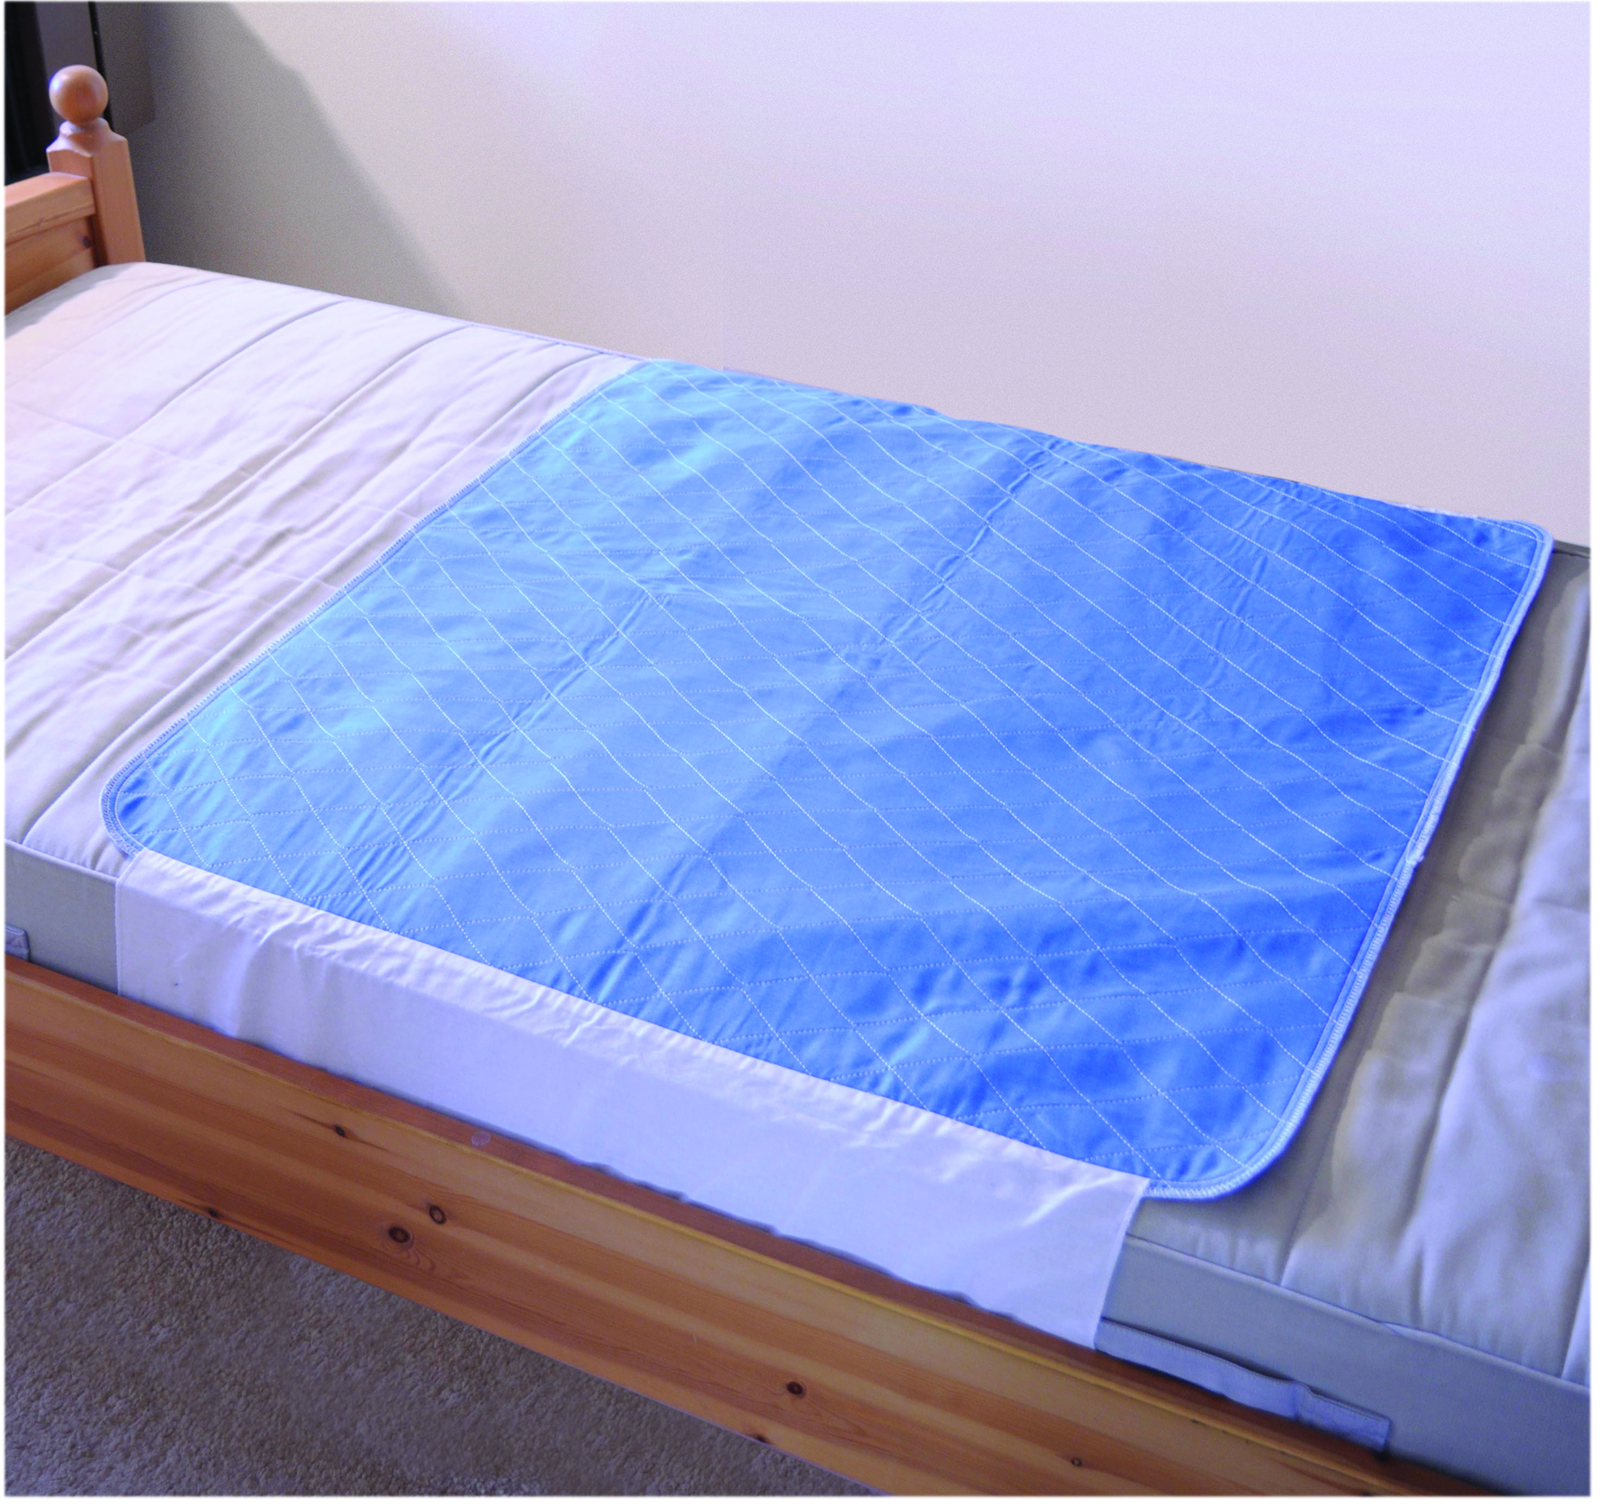 Washable Bed Pad - Inspire Community Trust